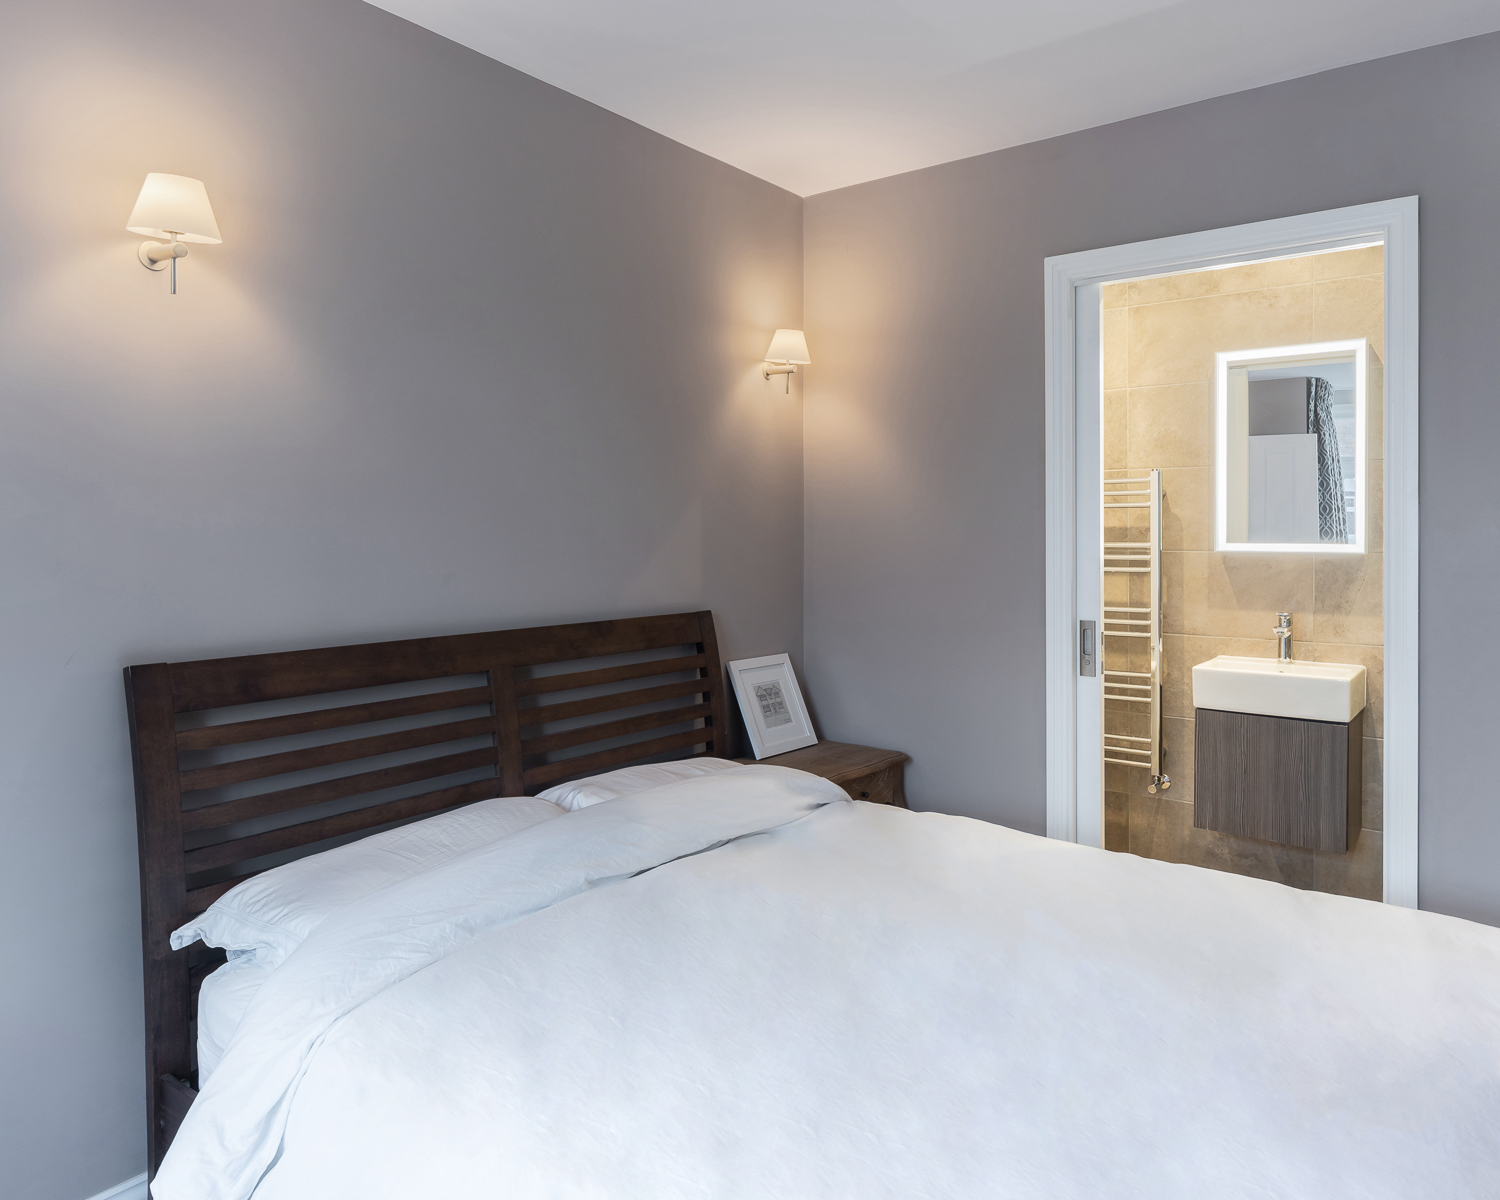 St Albans House bedroom and ensuite